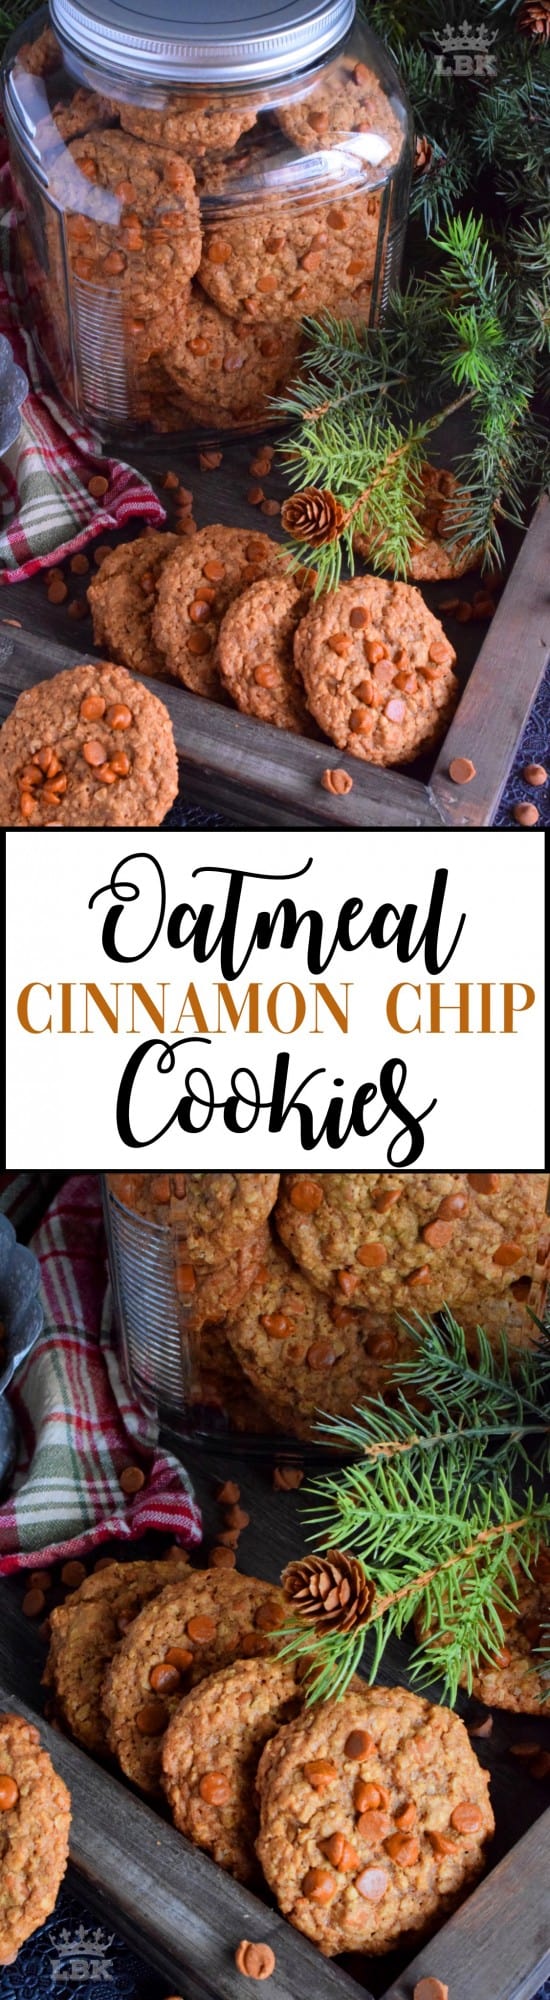 Oatmeal Cinnamon Chip Cookies are here to stay!  These will be a constant in our cookie jar; how about yours?#cinnamon #chip #oatmeal #cookies #holiday #christmas #baking